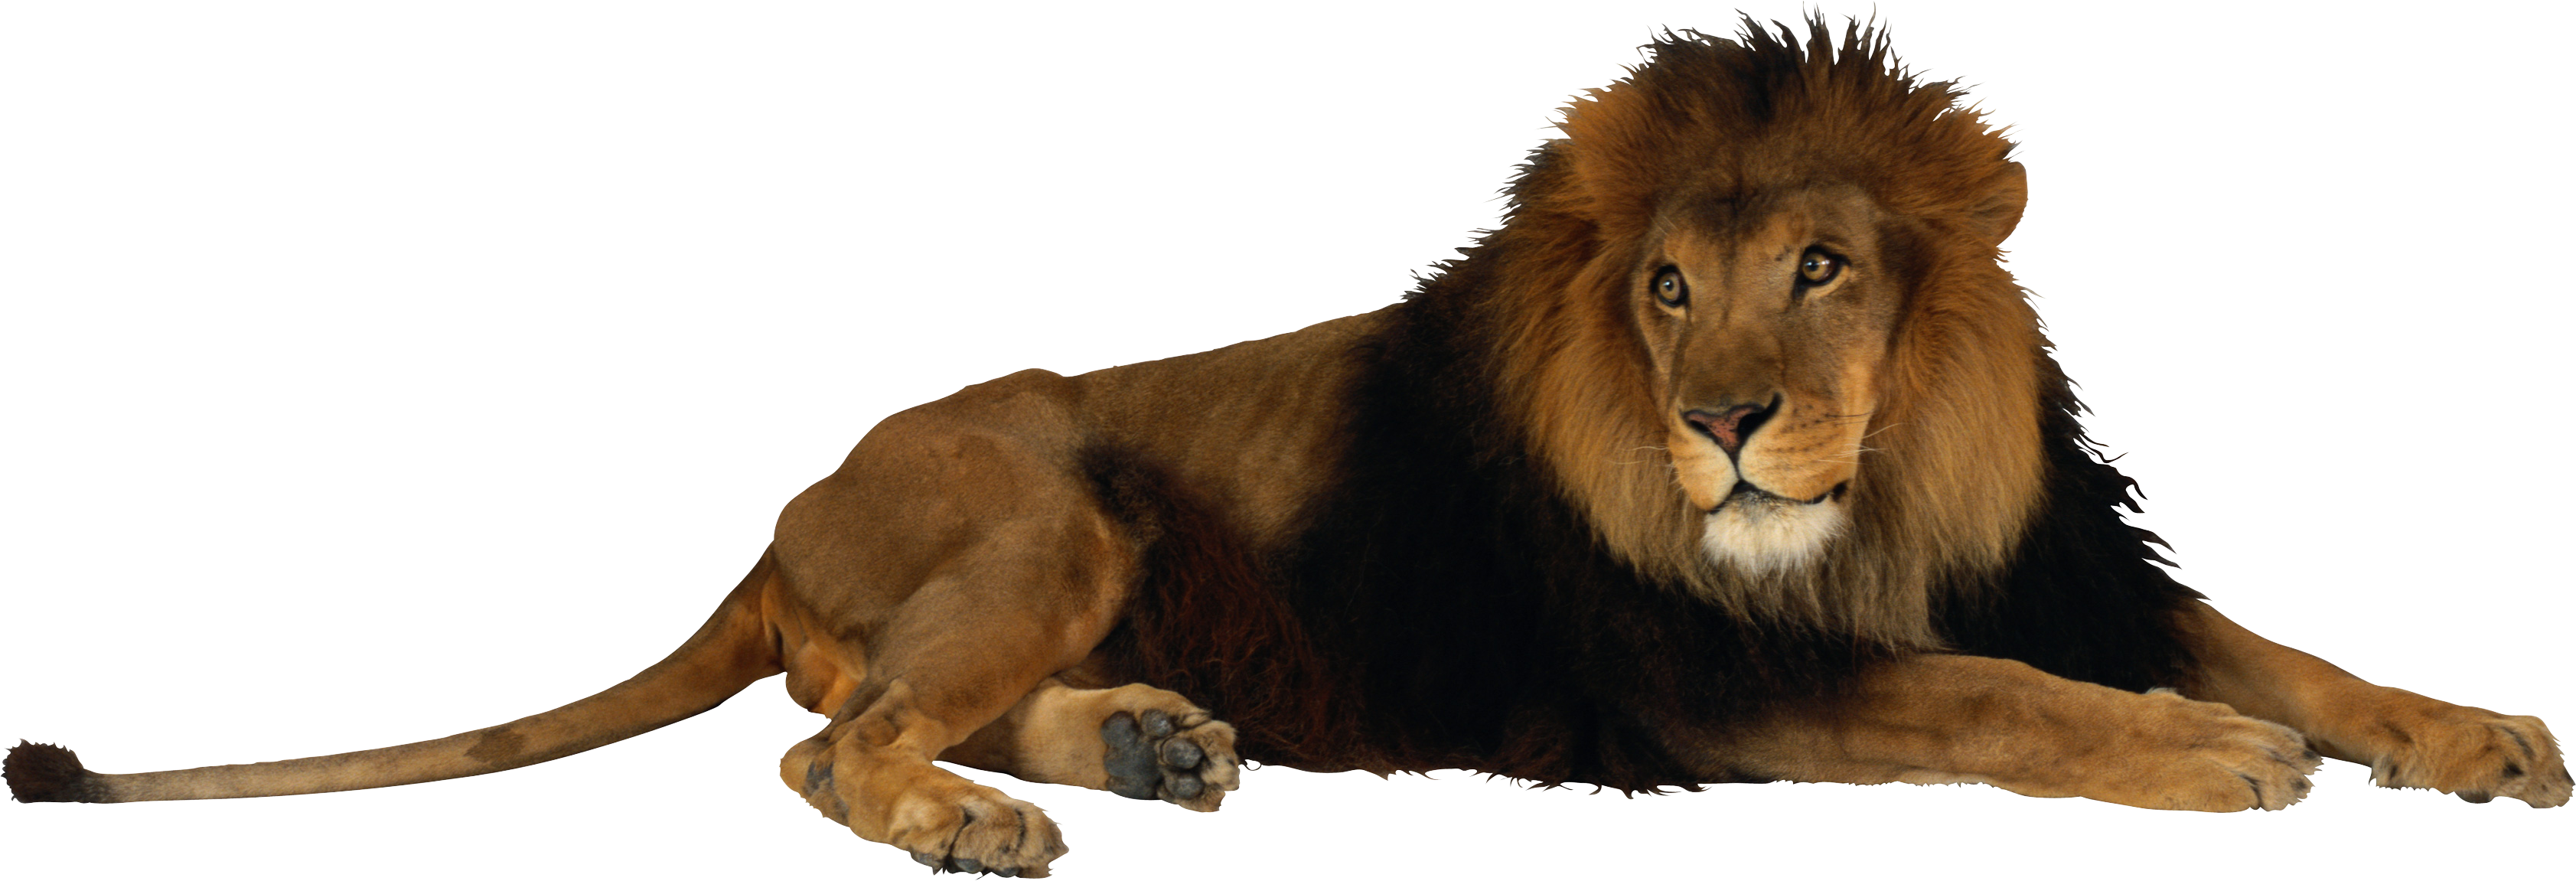 Lion Image Clipart PNG Transparent Background, Free Download #42281 -  FreeIconsPNG